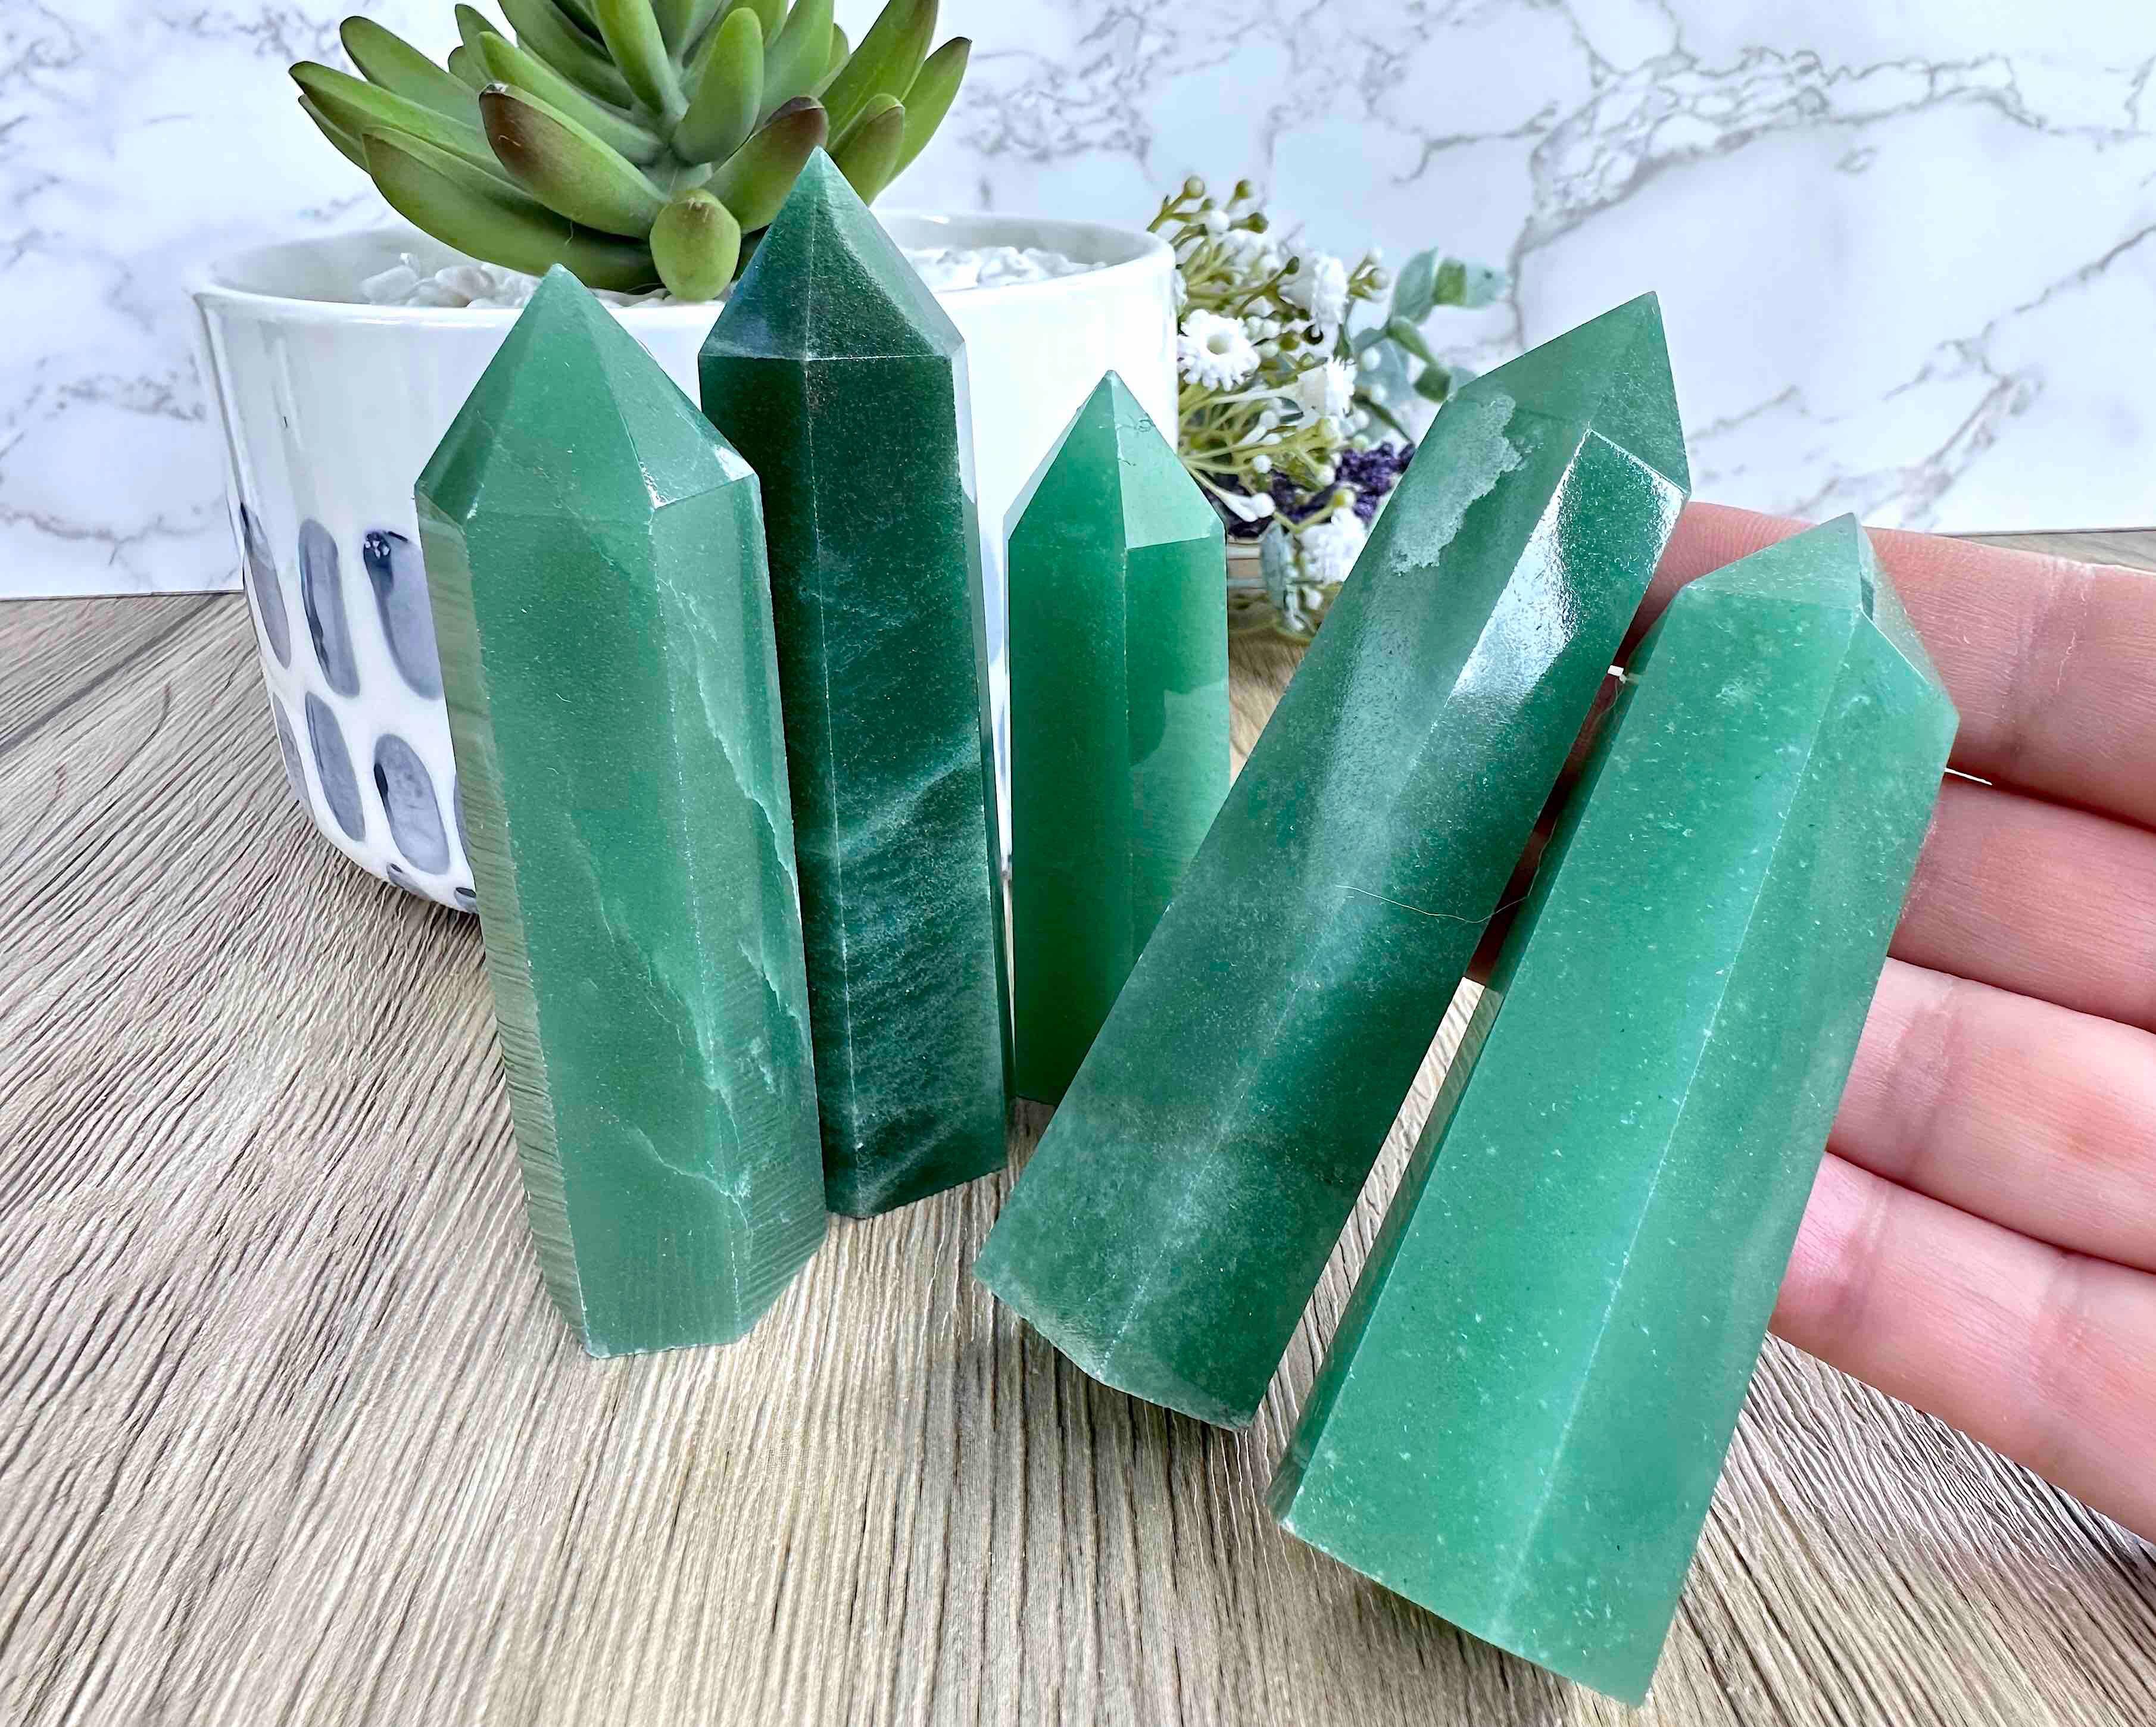 Green Aventurine Crystal Towers | Prosperity and Happiness Crystals